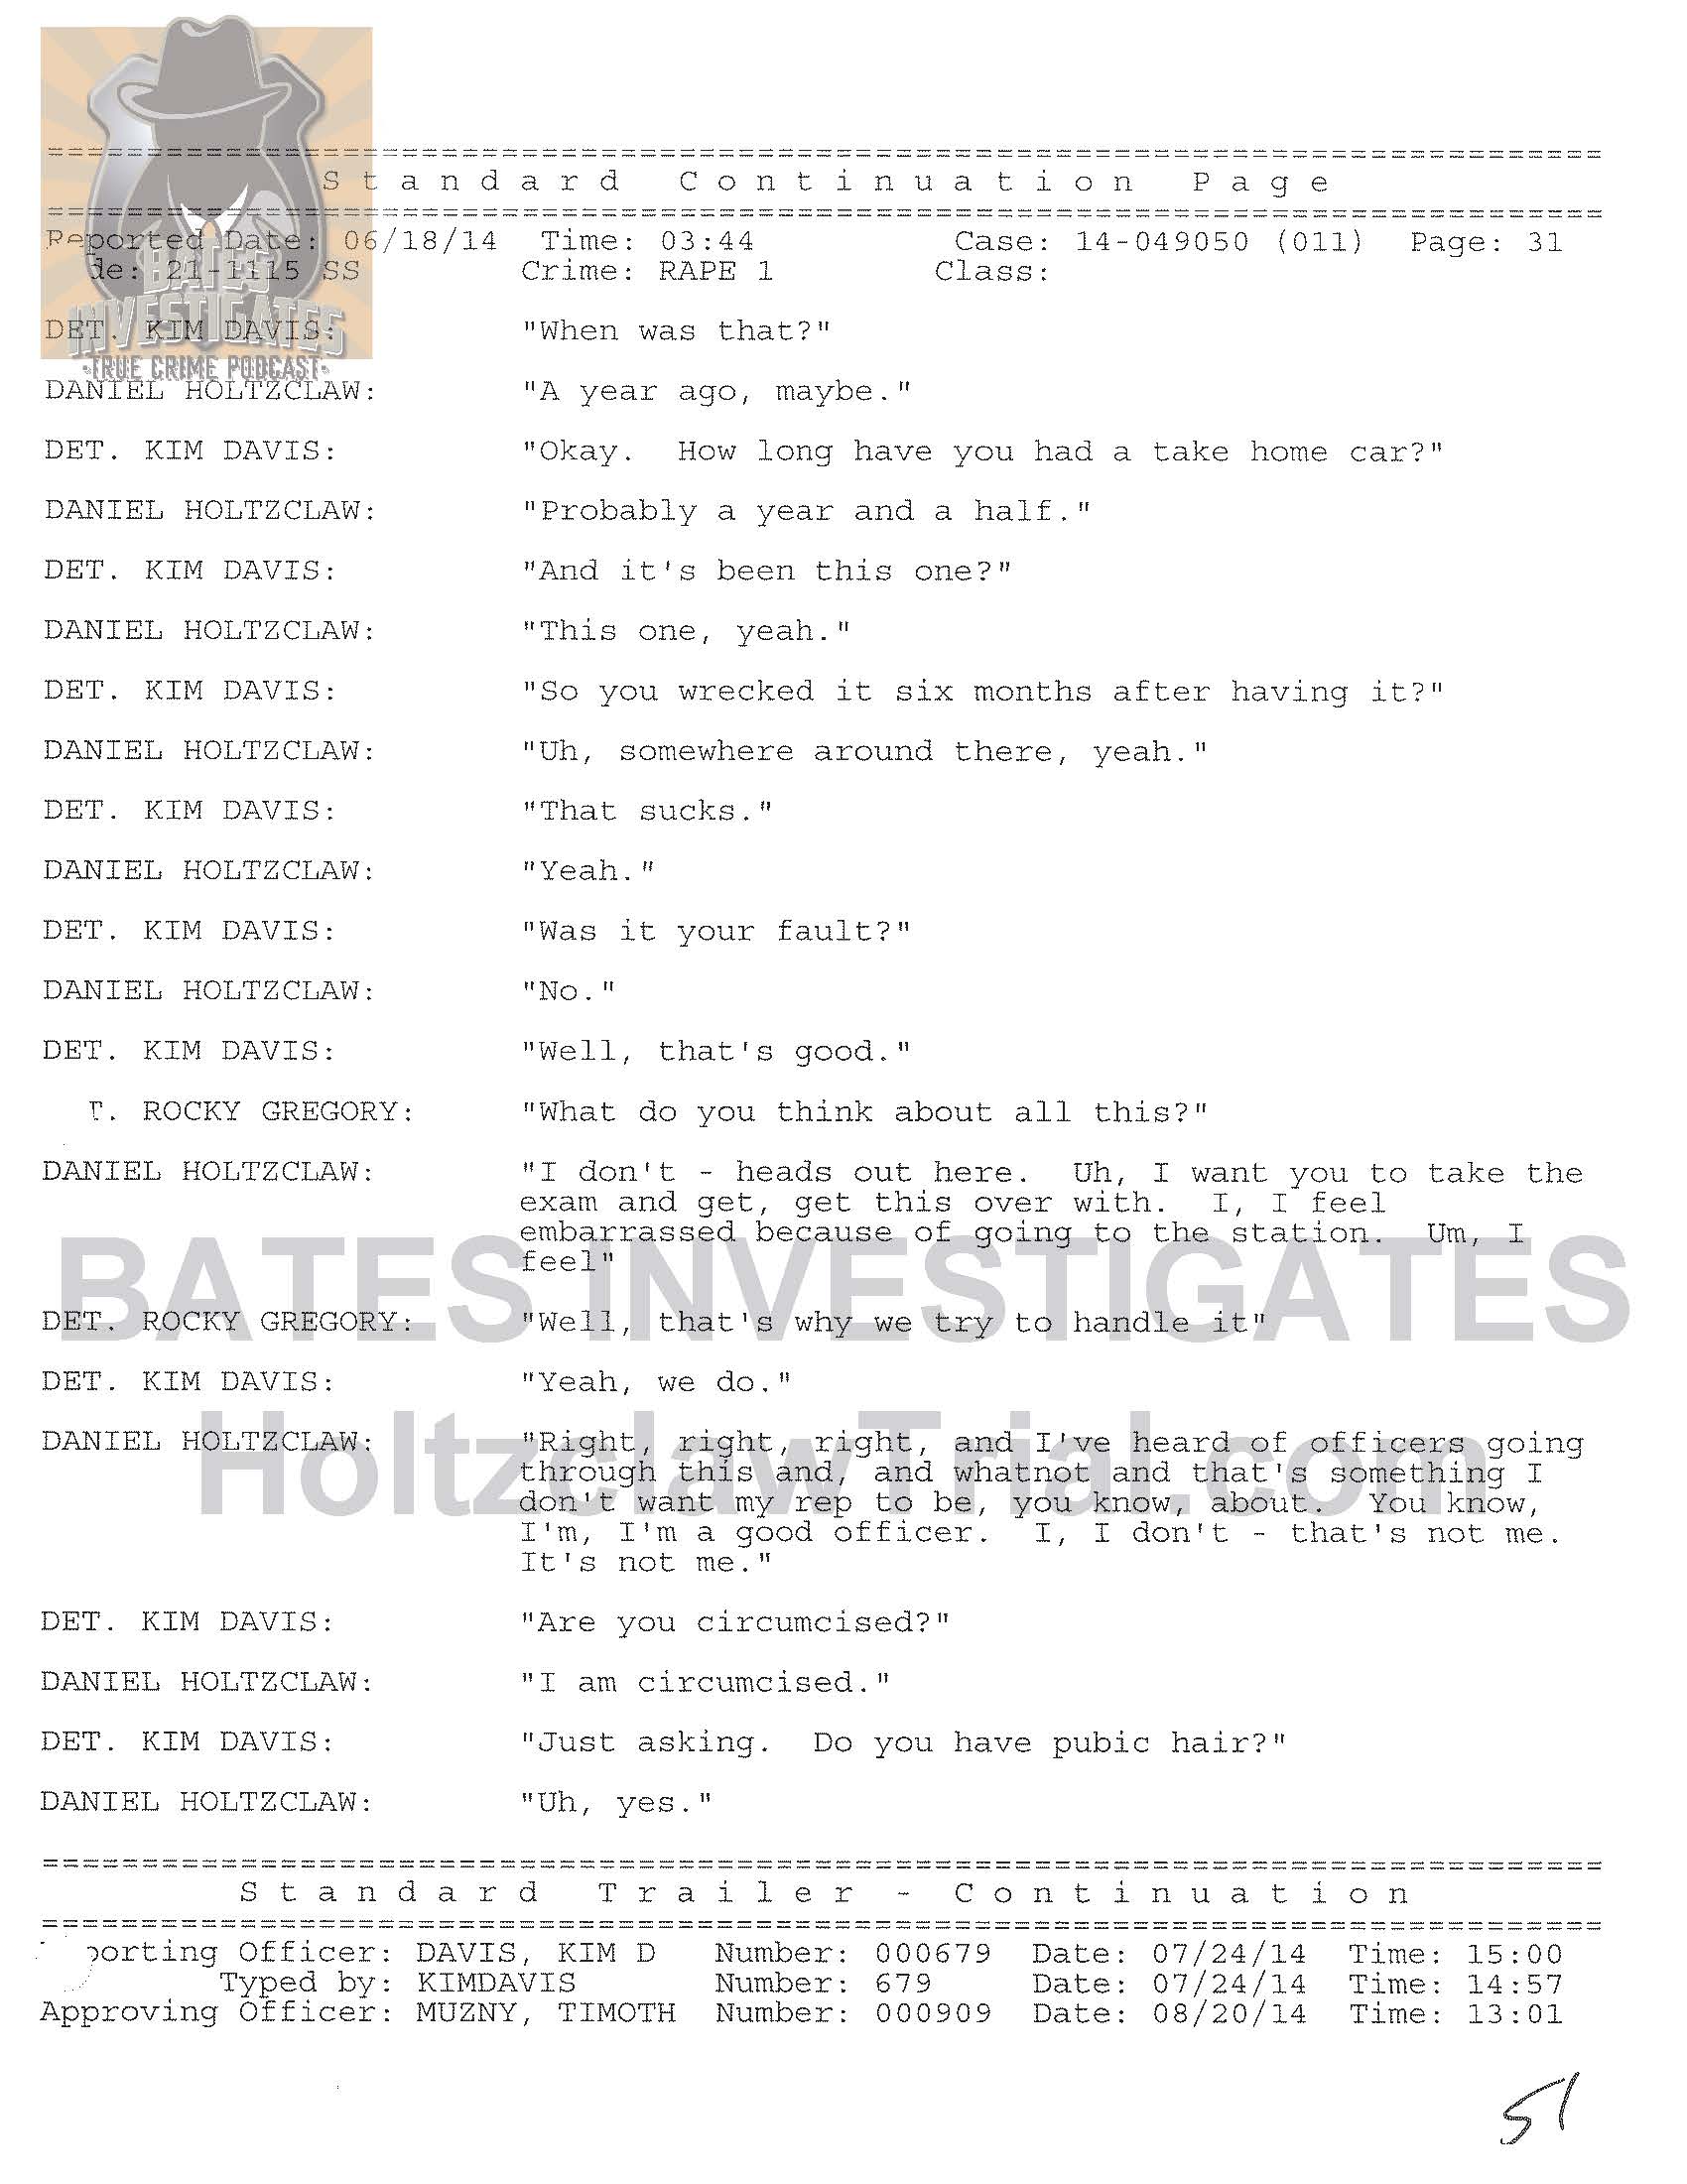 Holtzclaw Interrogation Transcript - Ep02 Redacted_Page_31.jpg